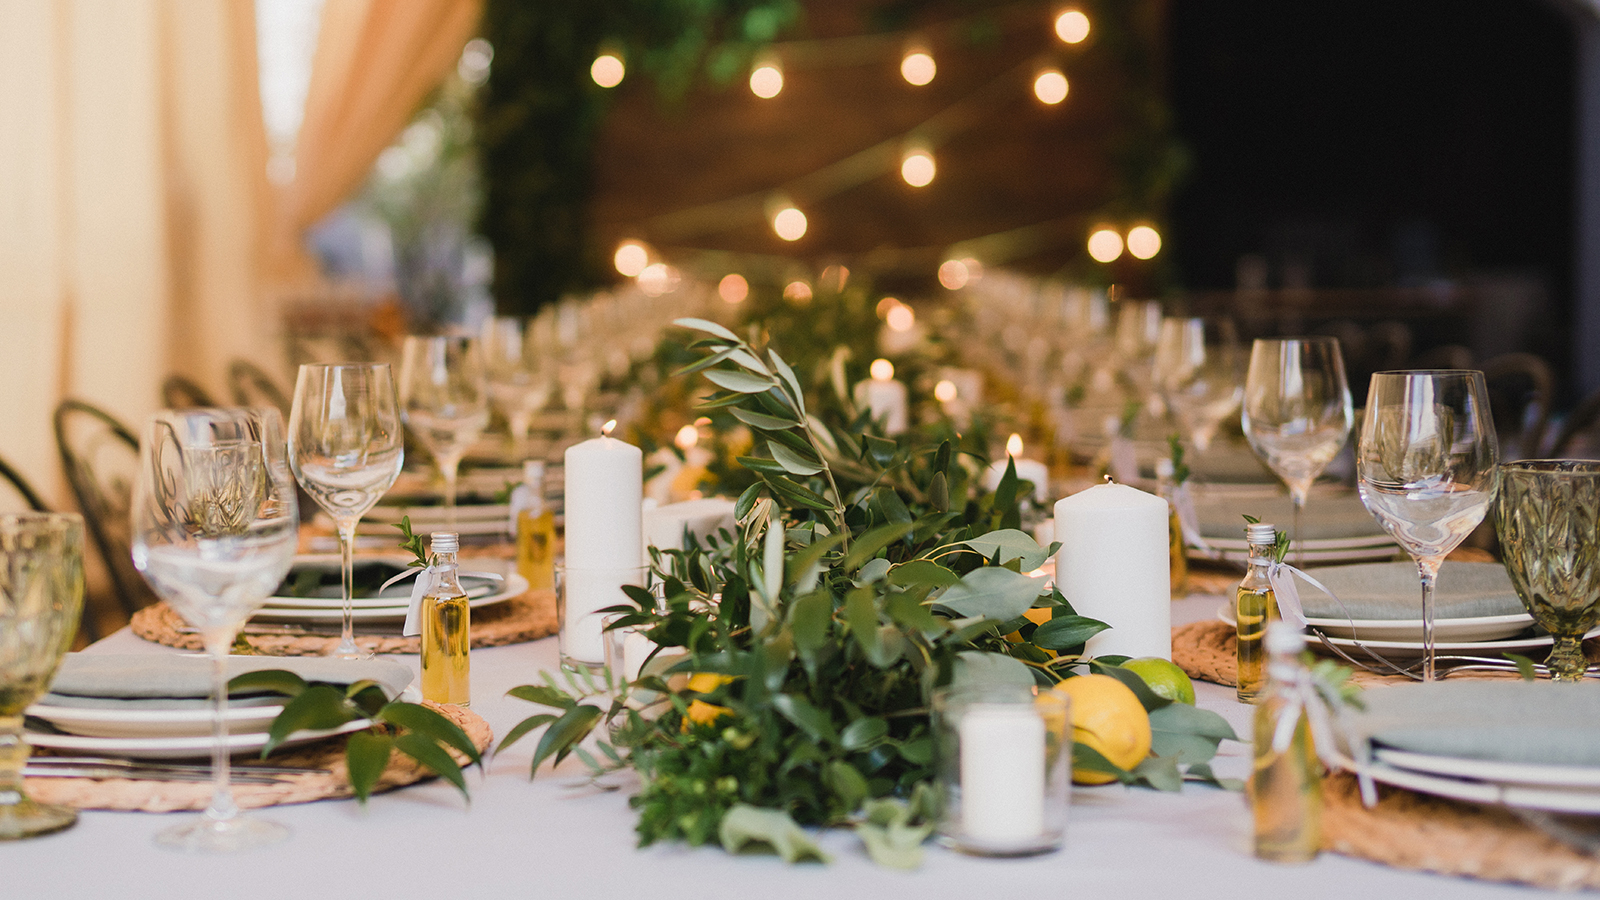 Coziness and style. Modern event design. Table setting at wedding reception. Floral compositions with beautiful flowers and greenery, candles, laying and plates on decorated table.